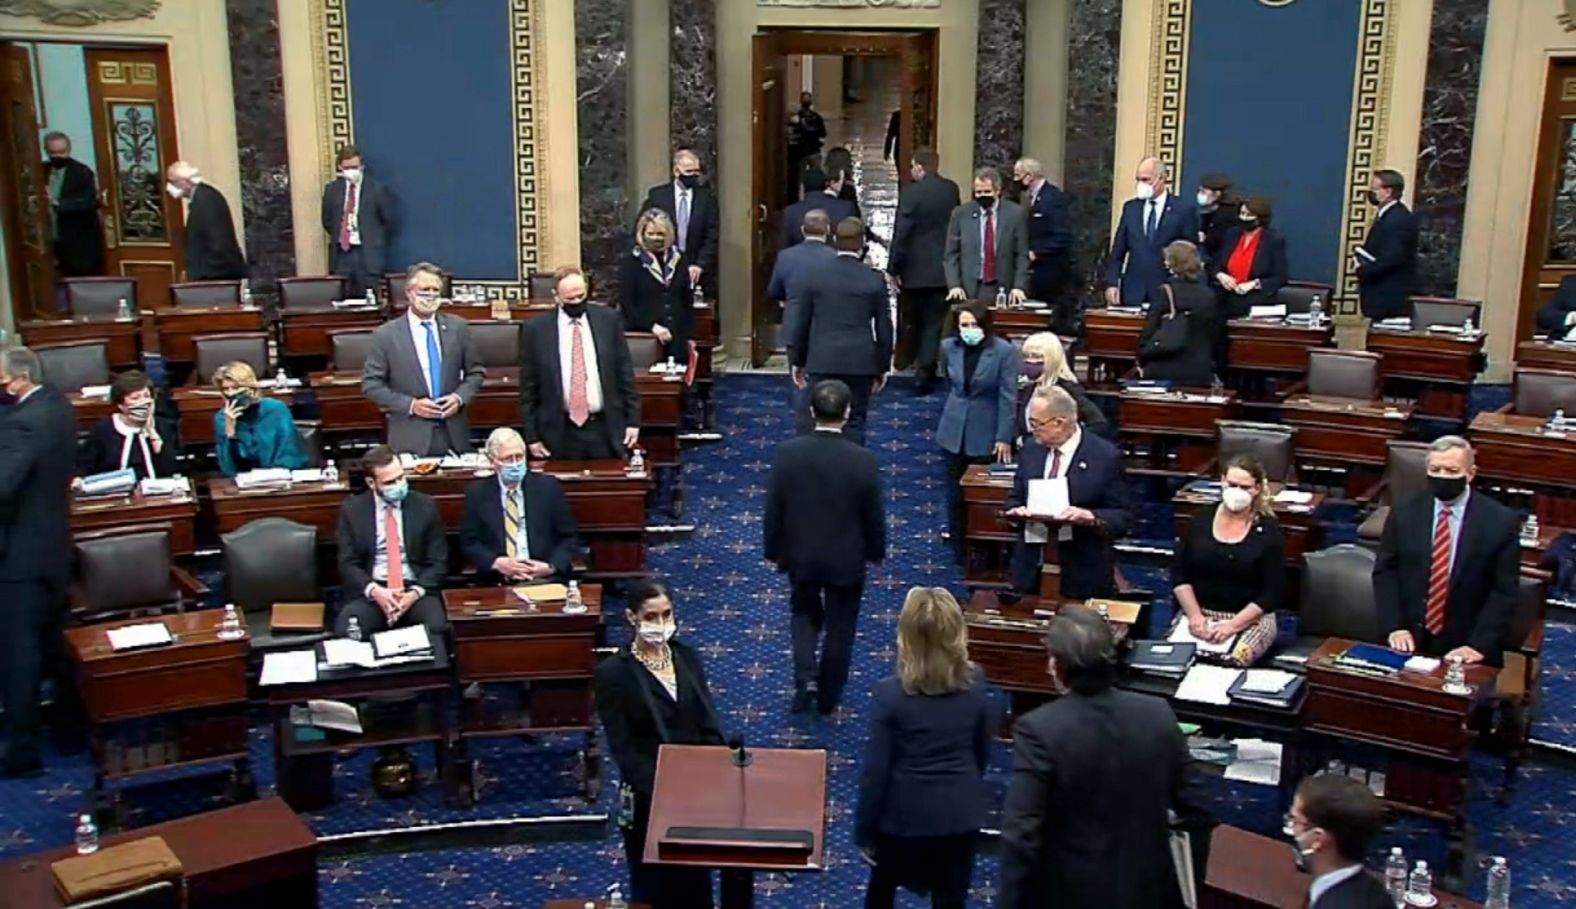 The House impeachment managers are escorted out of the Senate Chamber after the final vote Saturday.